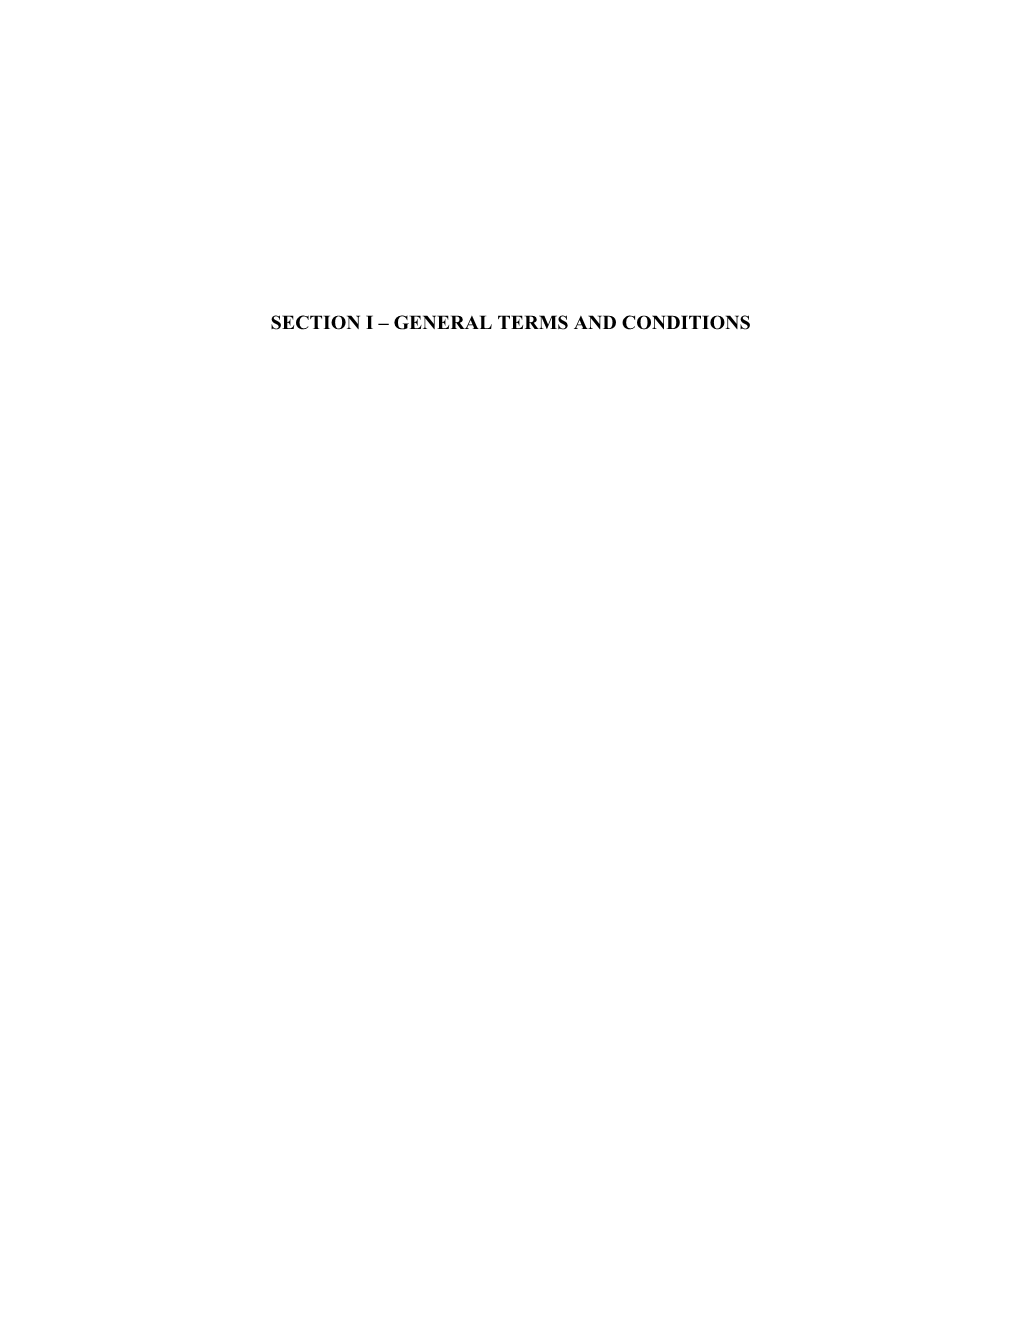 SECTION I – GENERAL TERMS and CONDITIONS Table of Contents